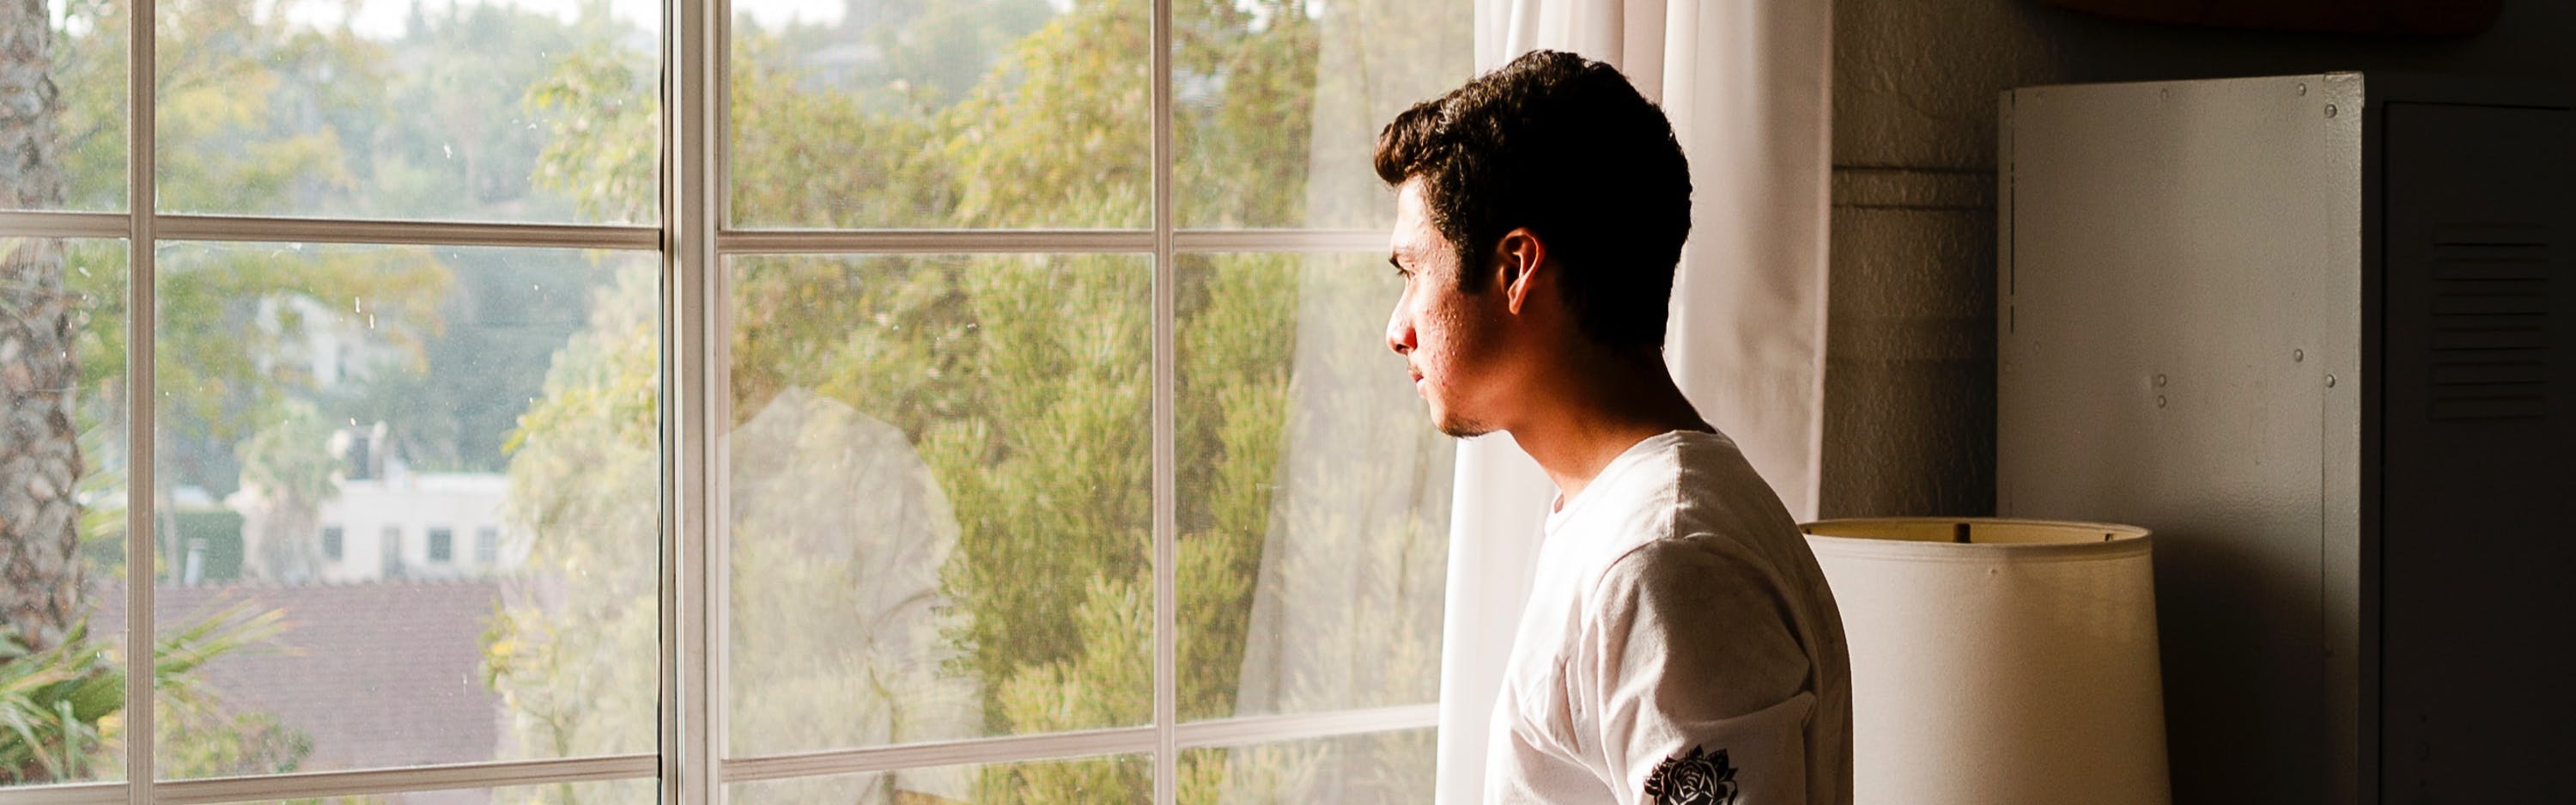 A man looks out a window at home.